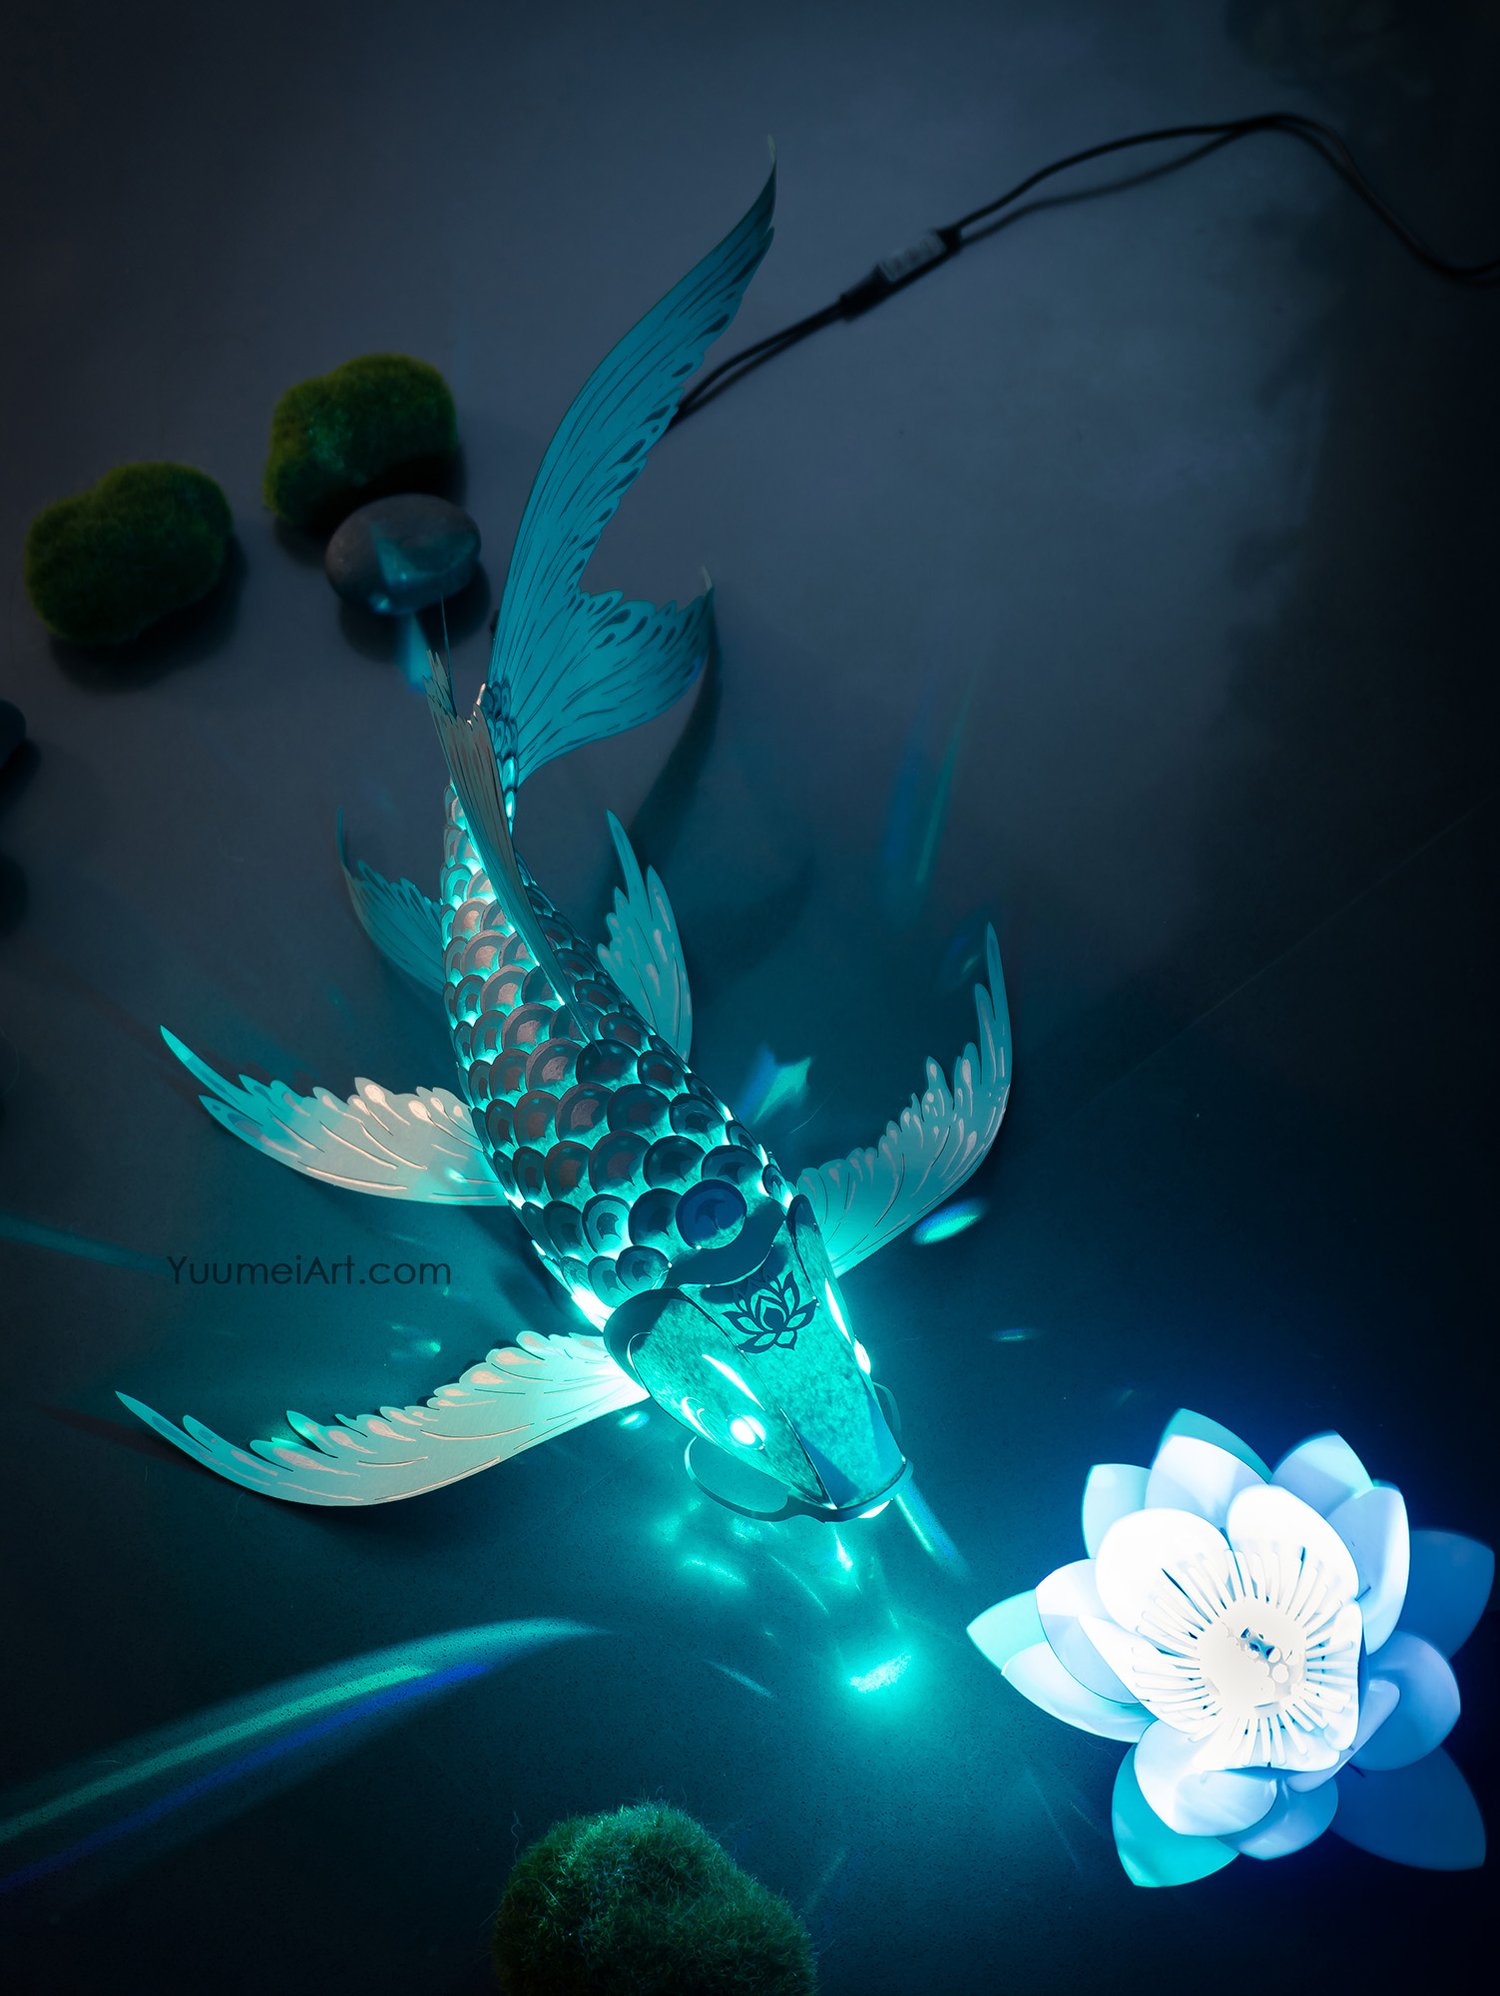 Yuumei on Twitter: "A new teal color and lotus head ornament has just been  added to my Koi Lantern Kickstarter! Thank you all for supporting this  project and helping us surpass the